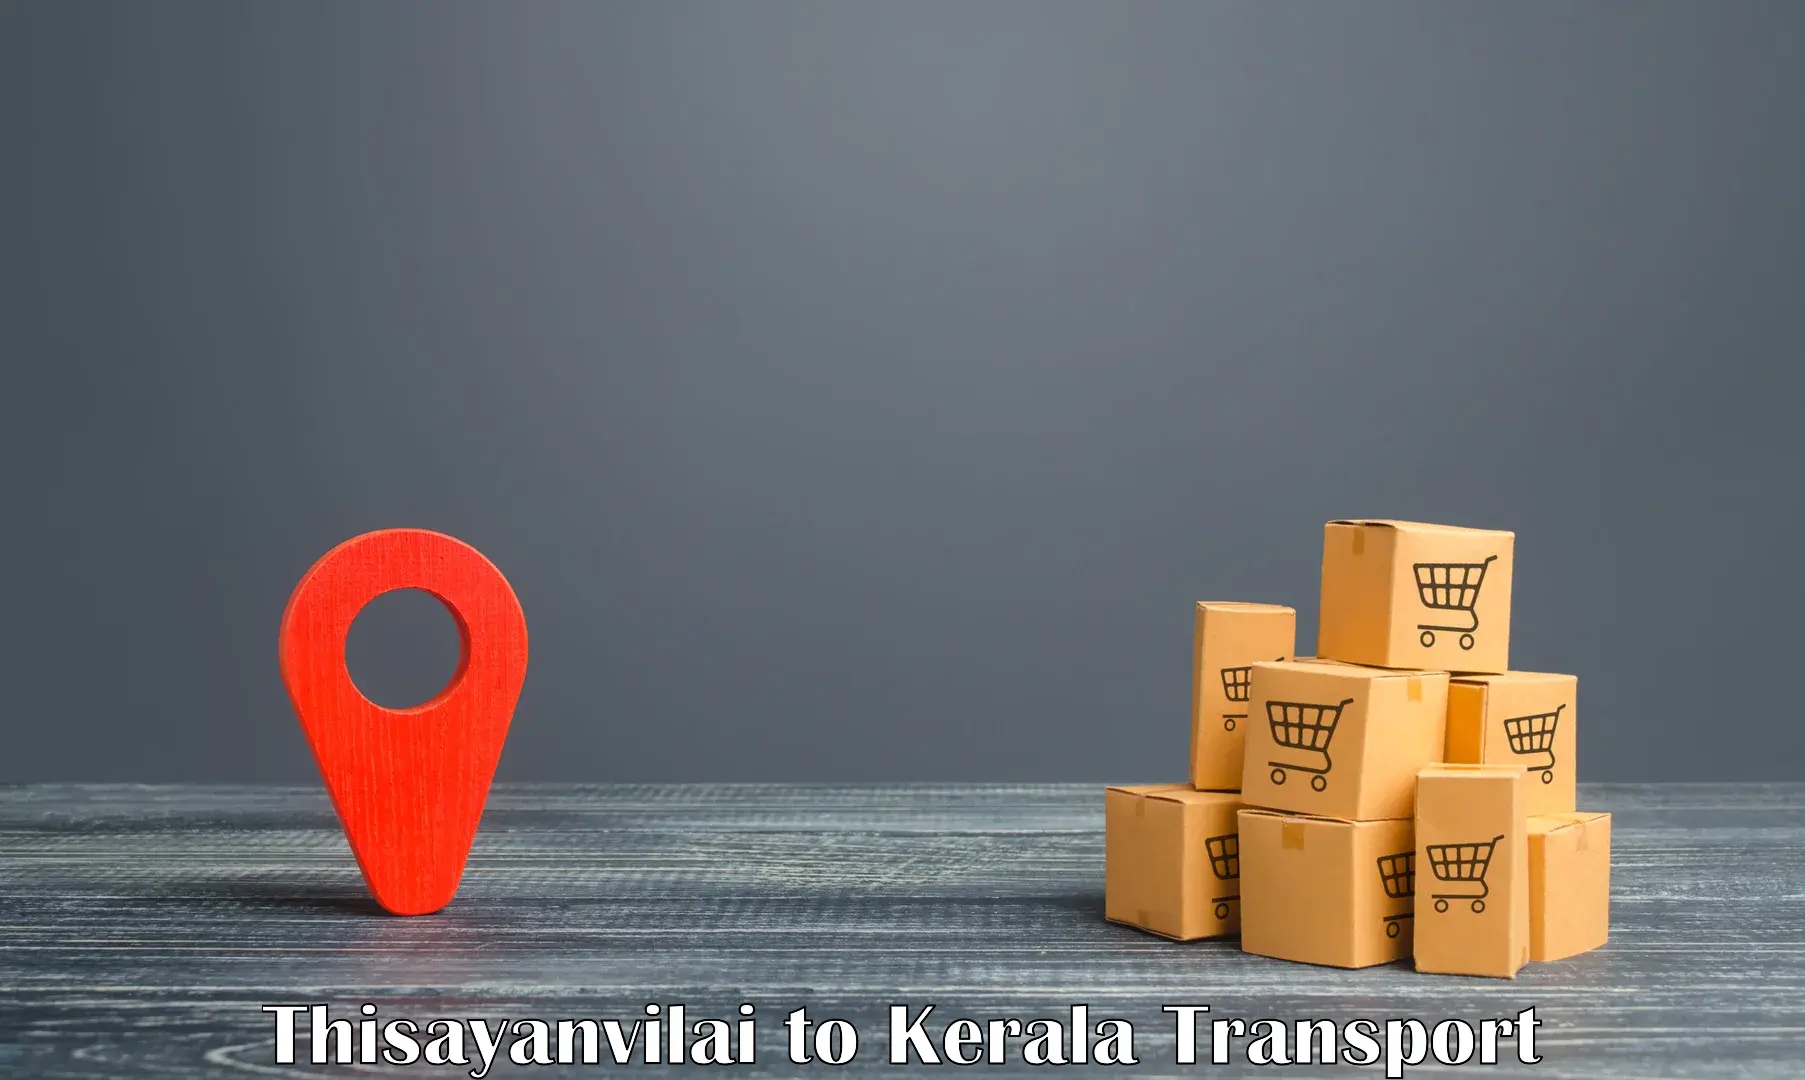 Delivery service Thisayanvilai to Kadanad